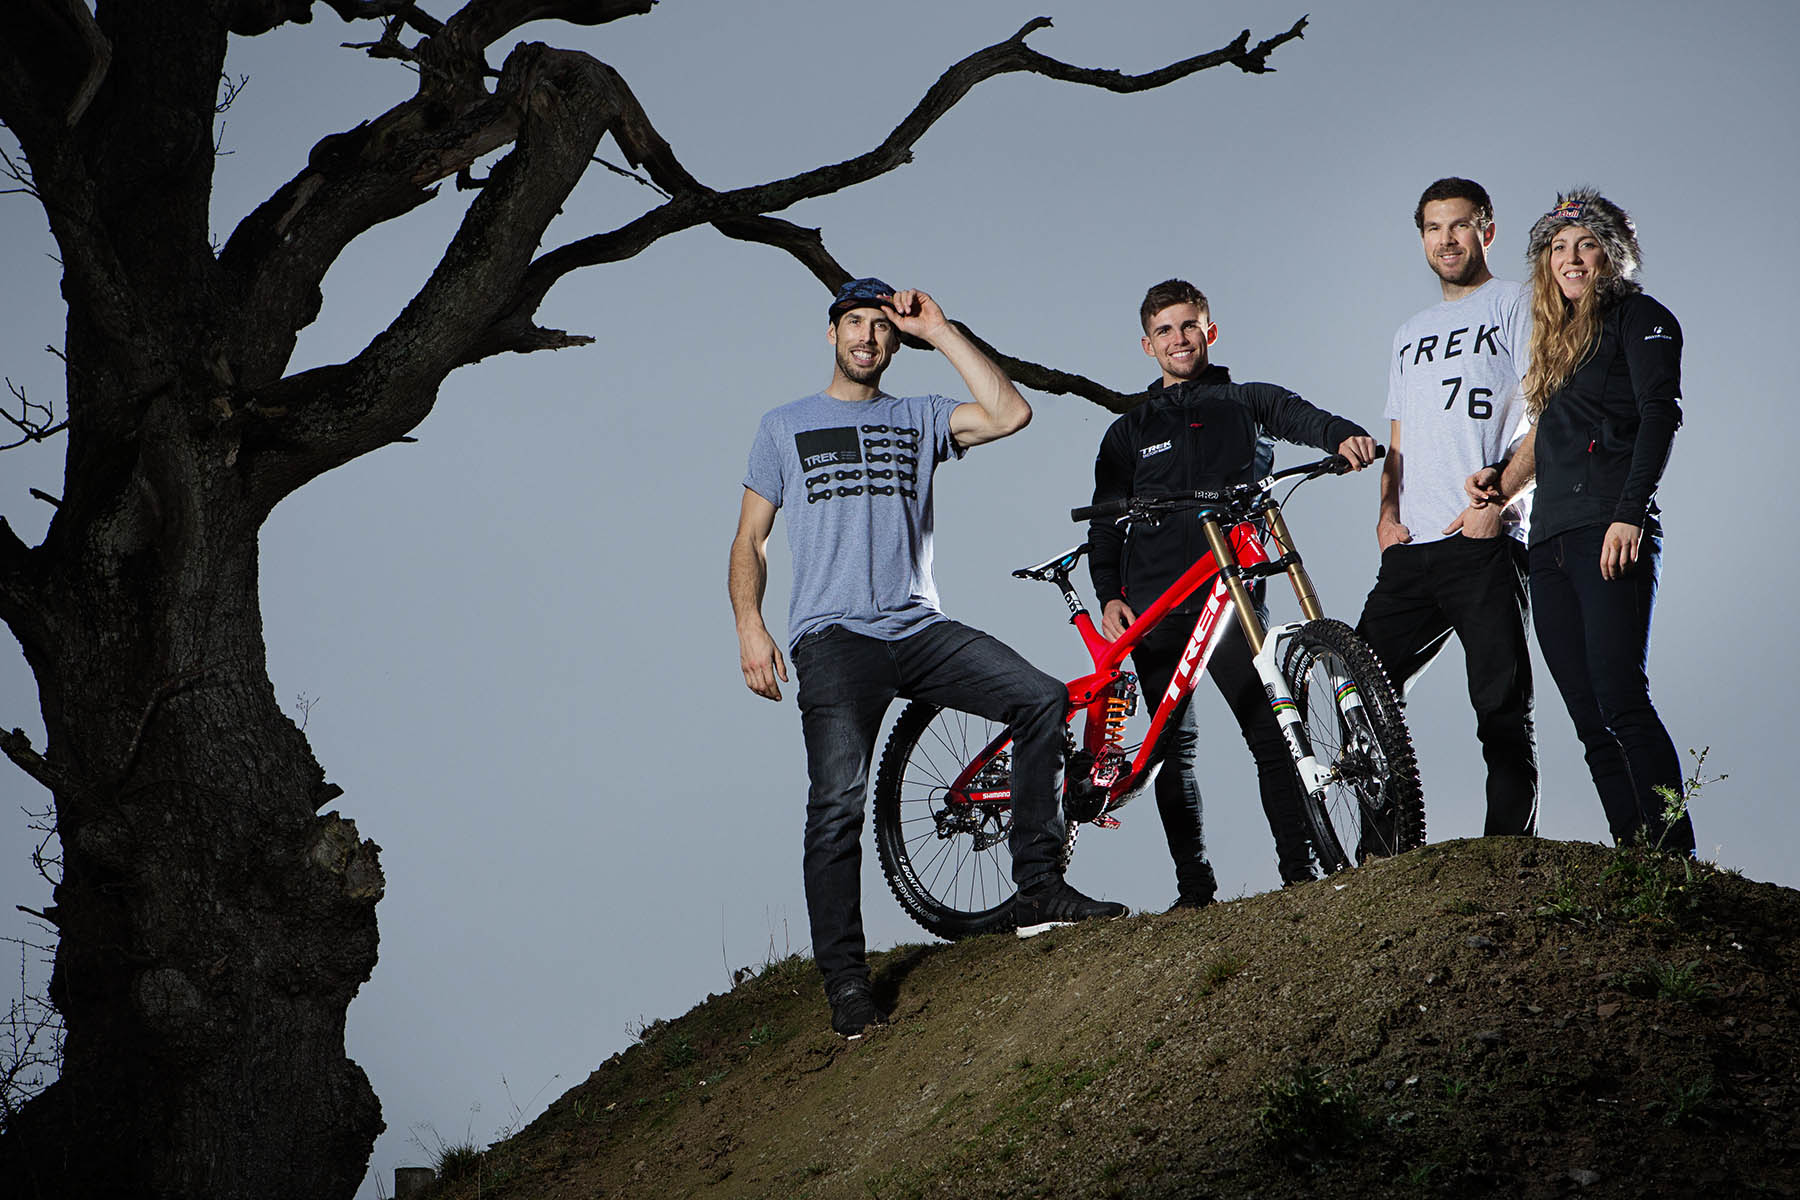 Atherton Racing in Wales, United Kingdom on the 04 November 2015